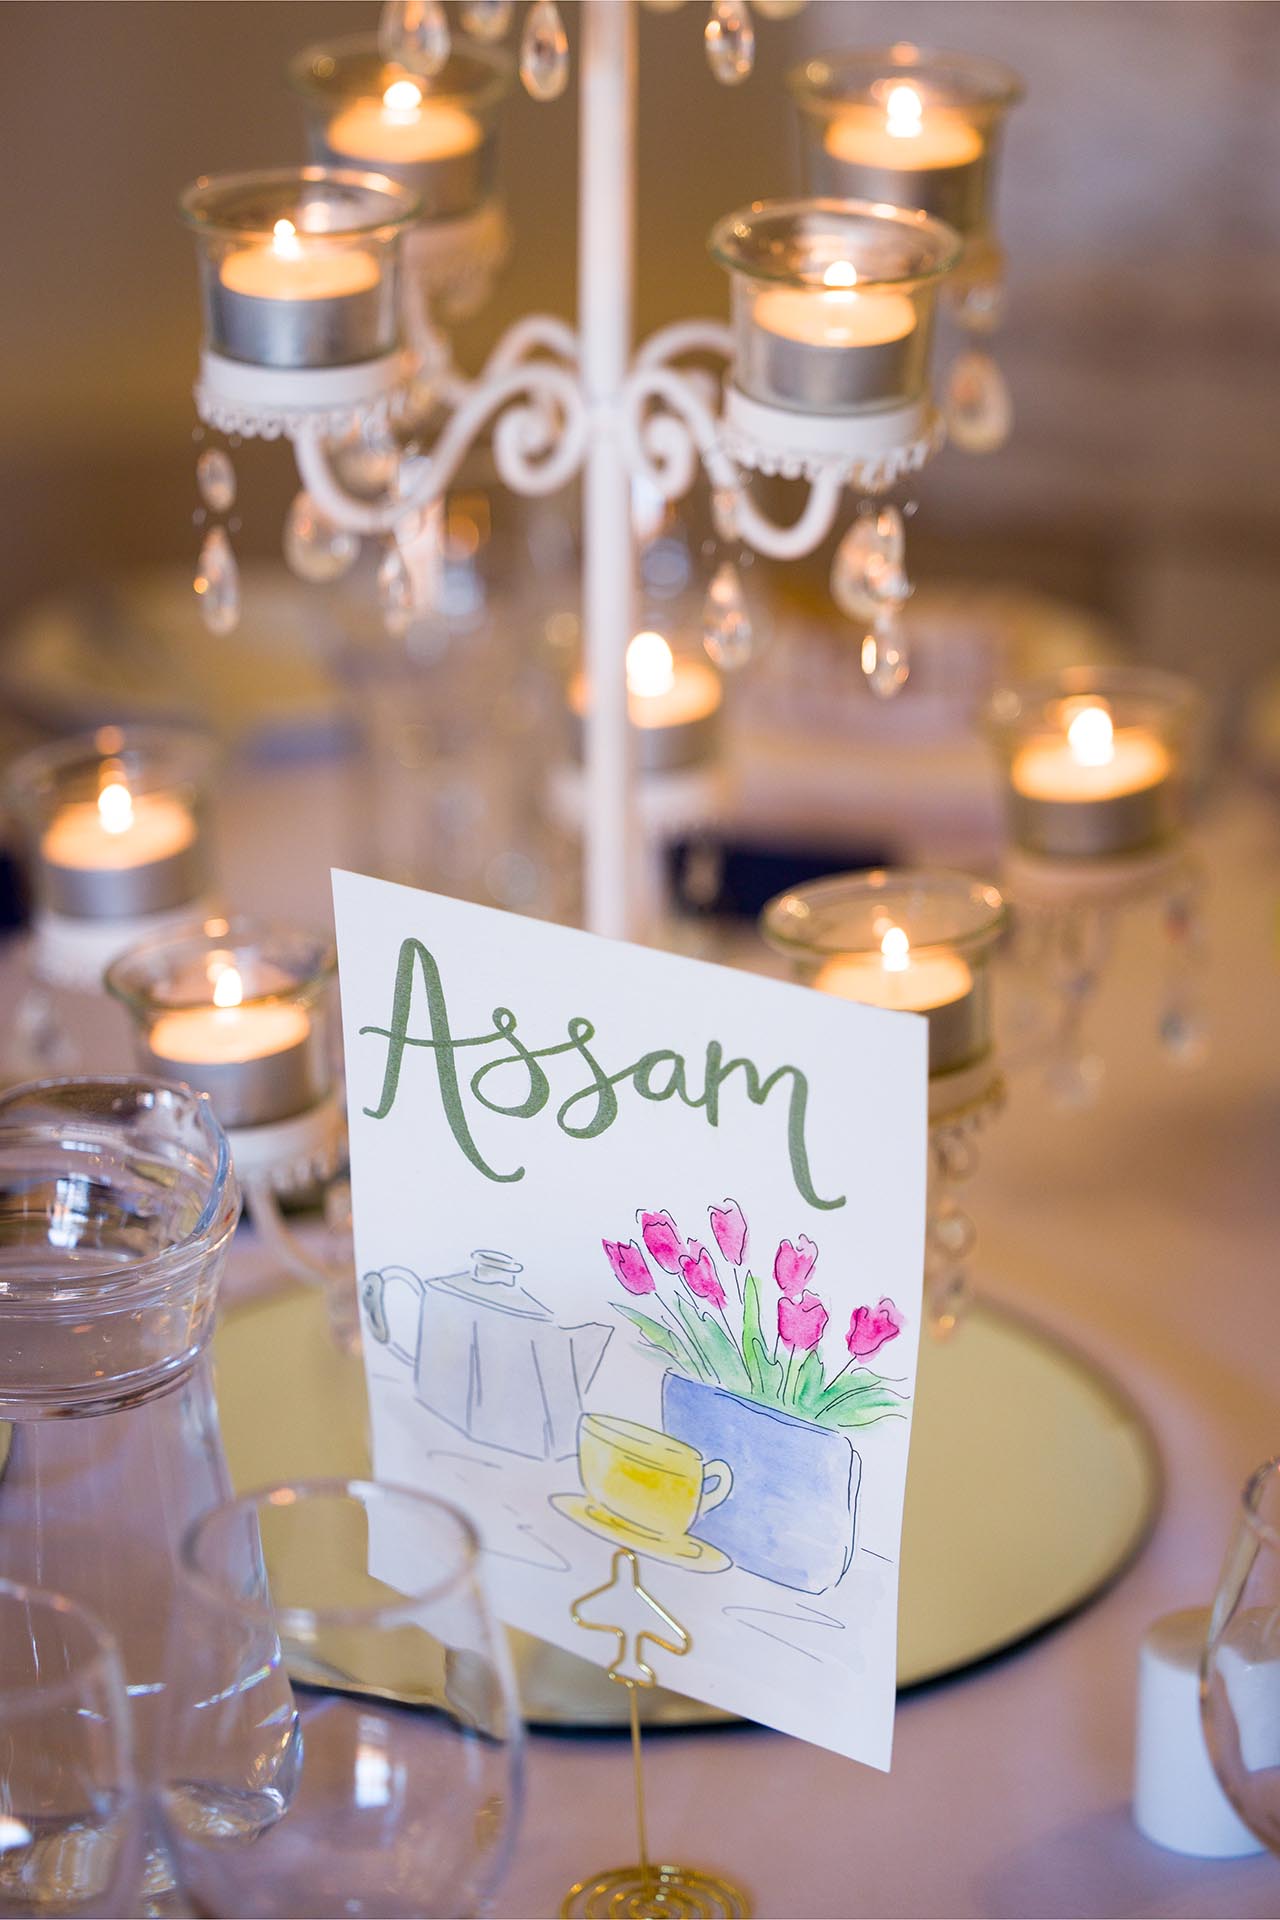 Table decorations for wedding breakfast at Leez Priory, Great Leighs, Chelmsford, by Essex wedding photographer